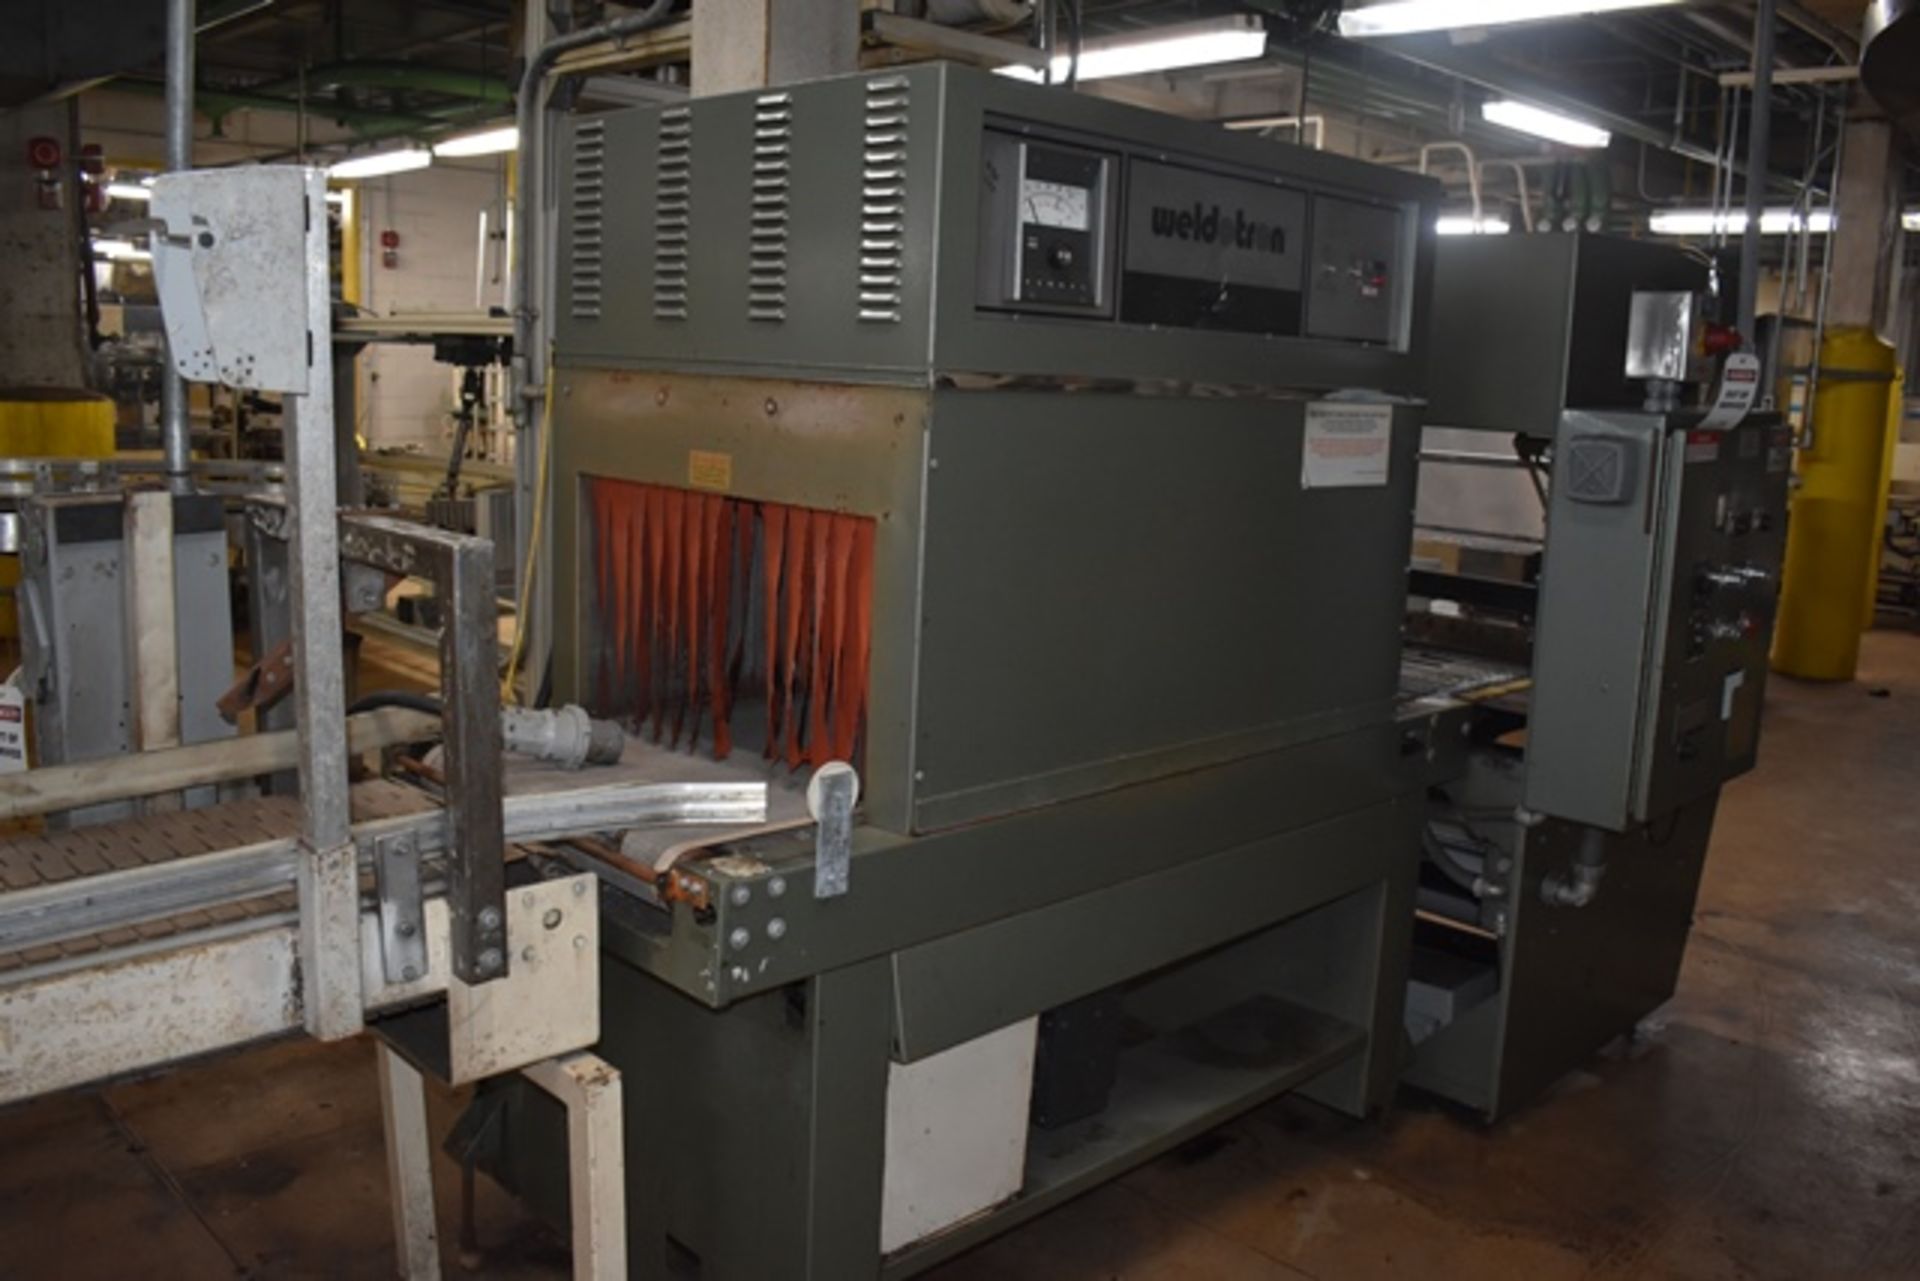 Weldotron tray wrapper, model 12080, with roller infeed table, sealing jaws, film rollers, case - Image 2 of 2